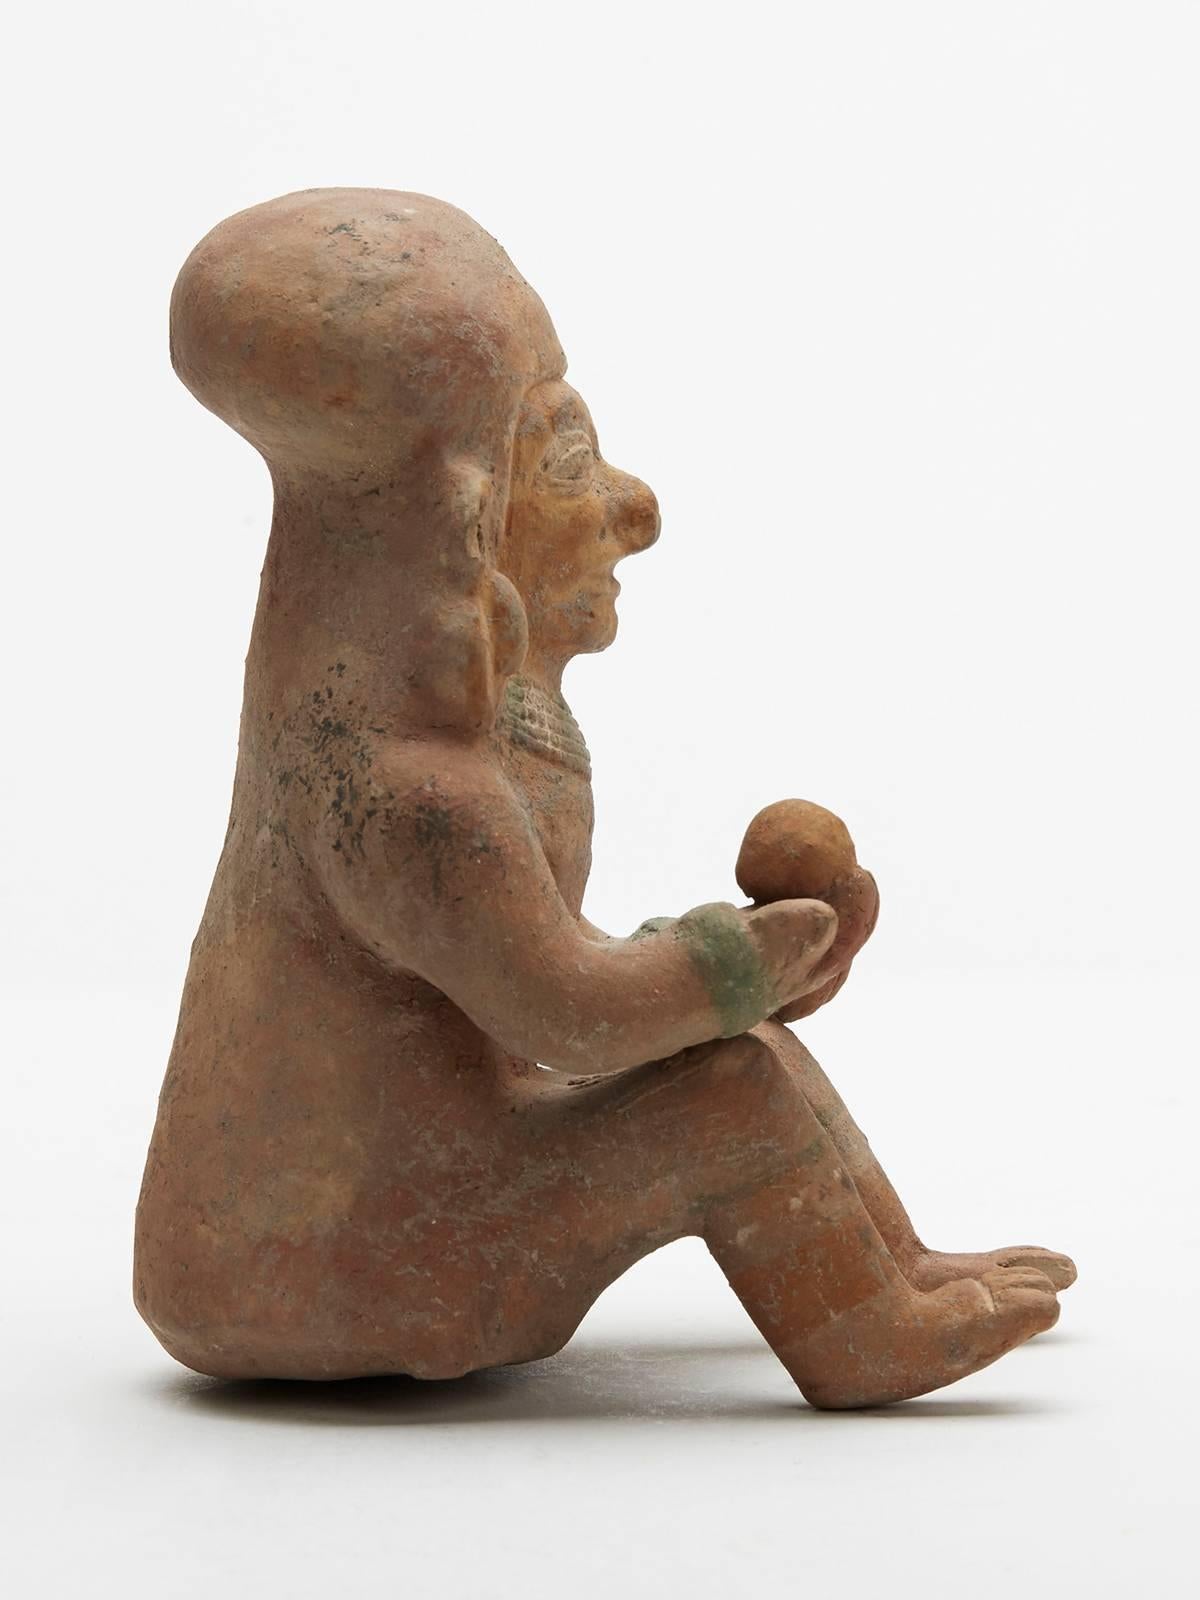 A fine Mexican Pre Columbian Jamacoaque seated pottery figure wearing a beaded necklet and wrist band and offering a ball in his right hand. The figure is made in terracotta colored clay with remnants of painted detail.

Provenance: Acquired by